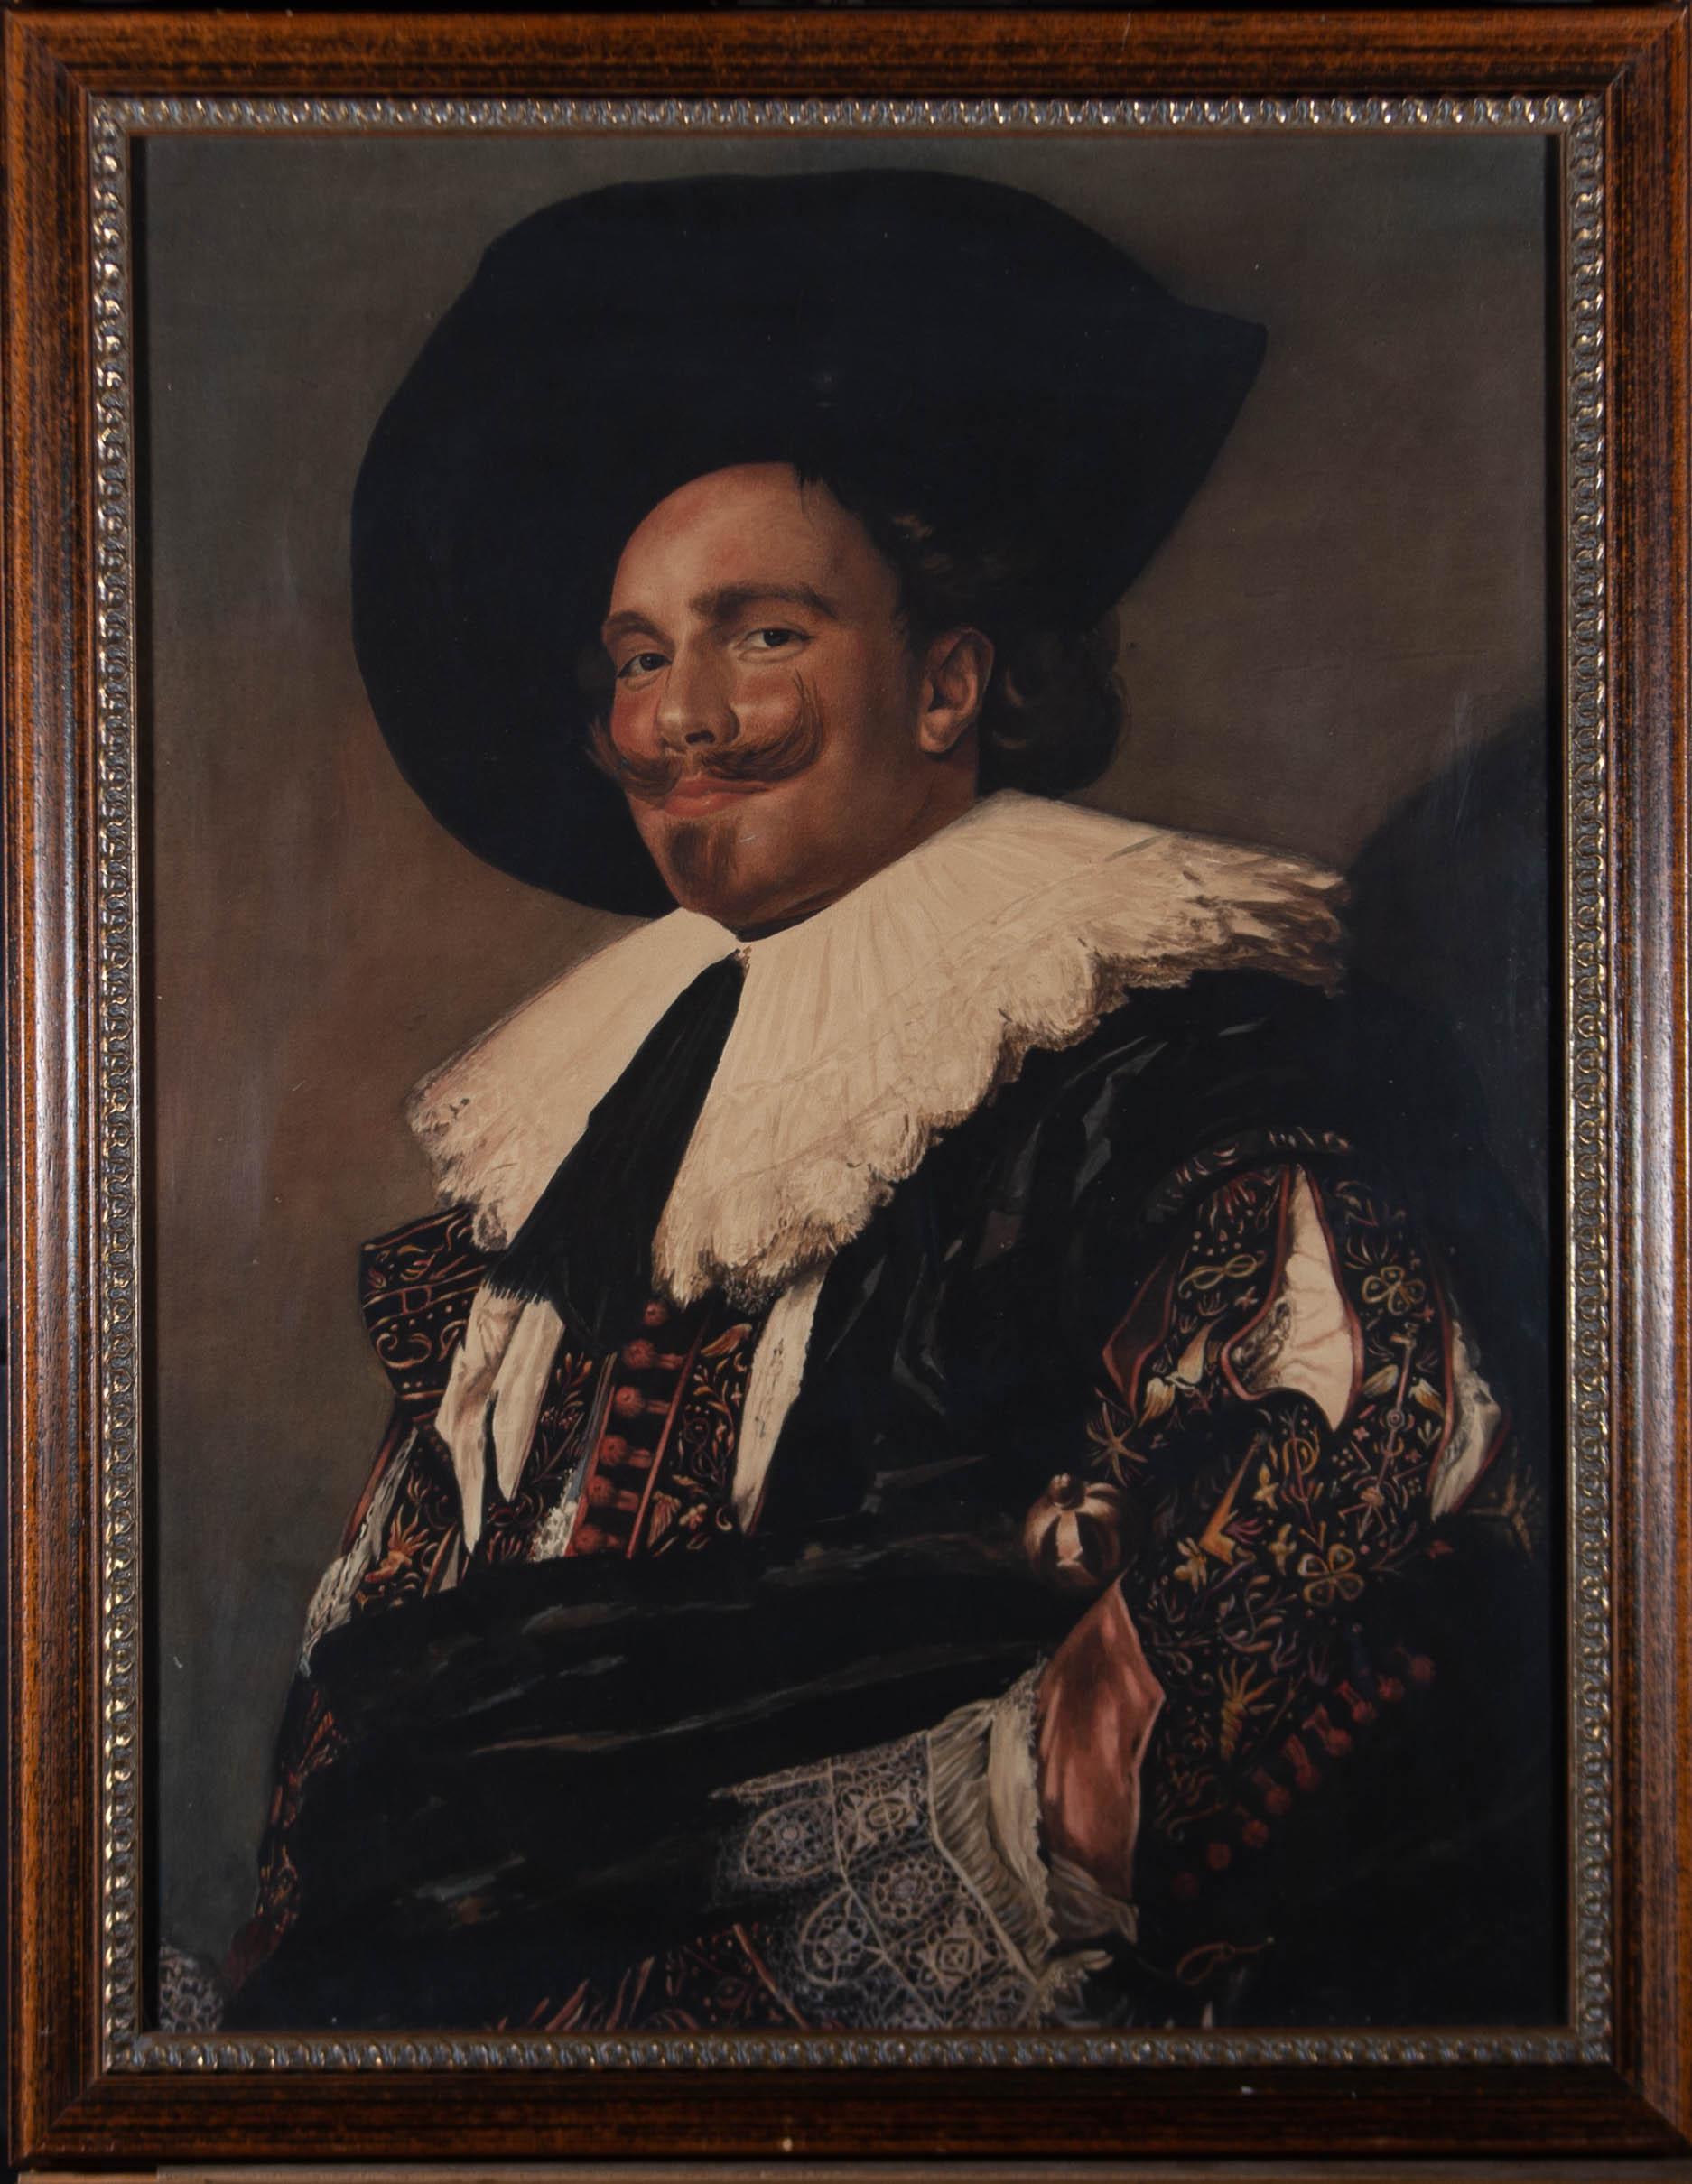 Unknown Portrait - H. J. Birchall after Frans Hals - Early 20thC Watercolour, The Laughing Cavalier